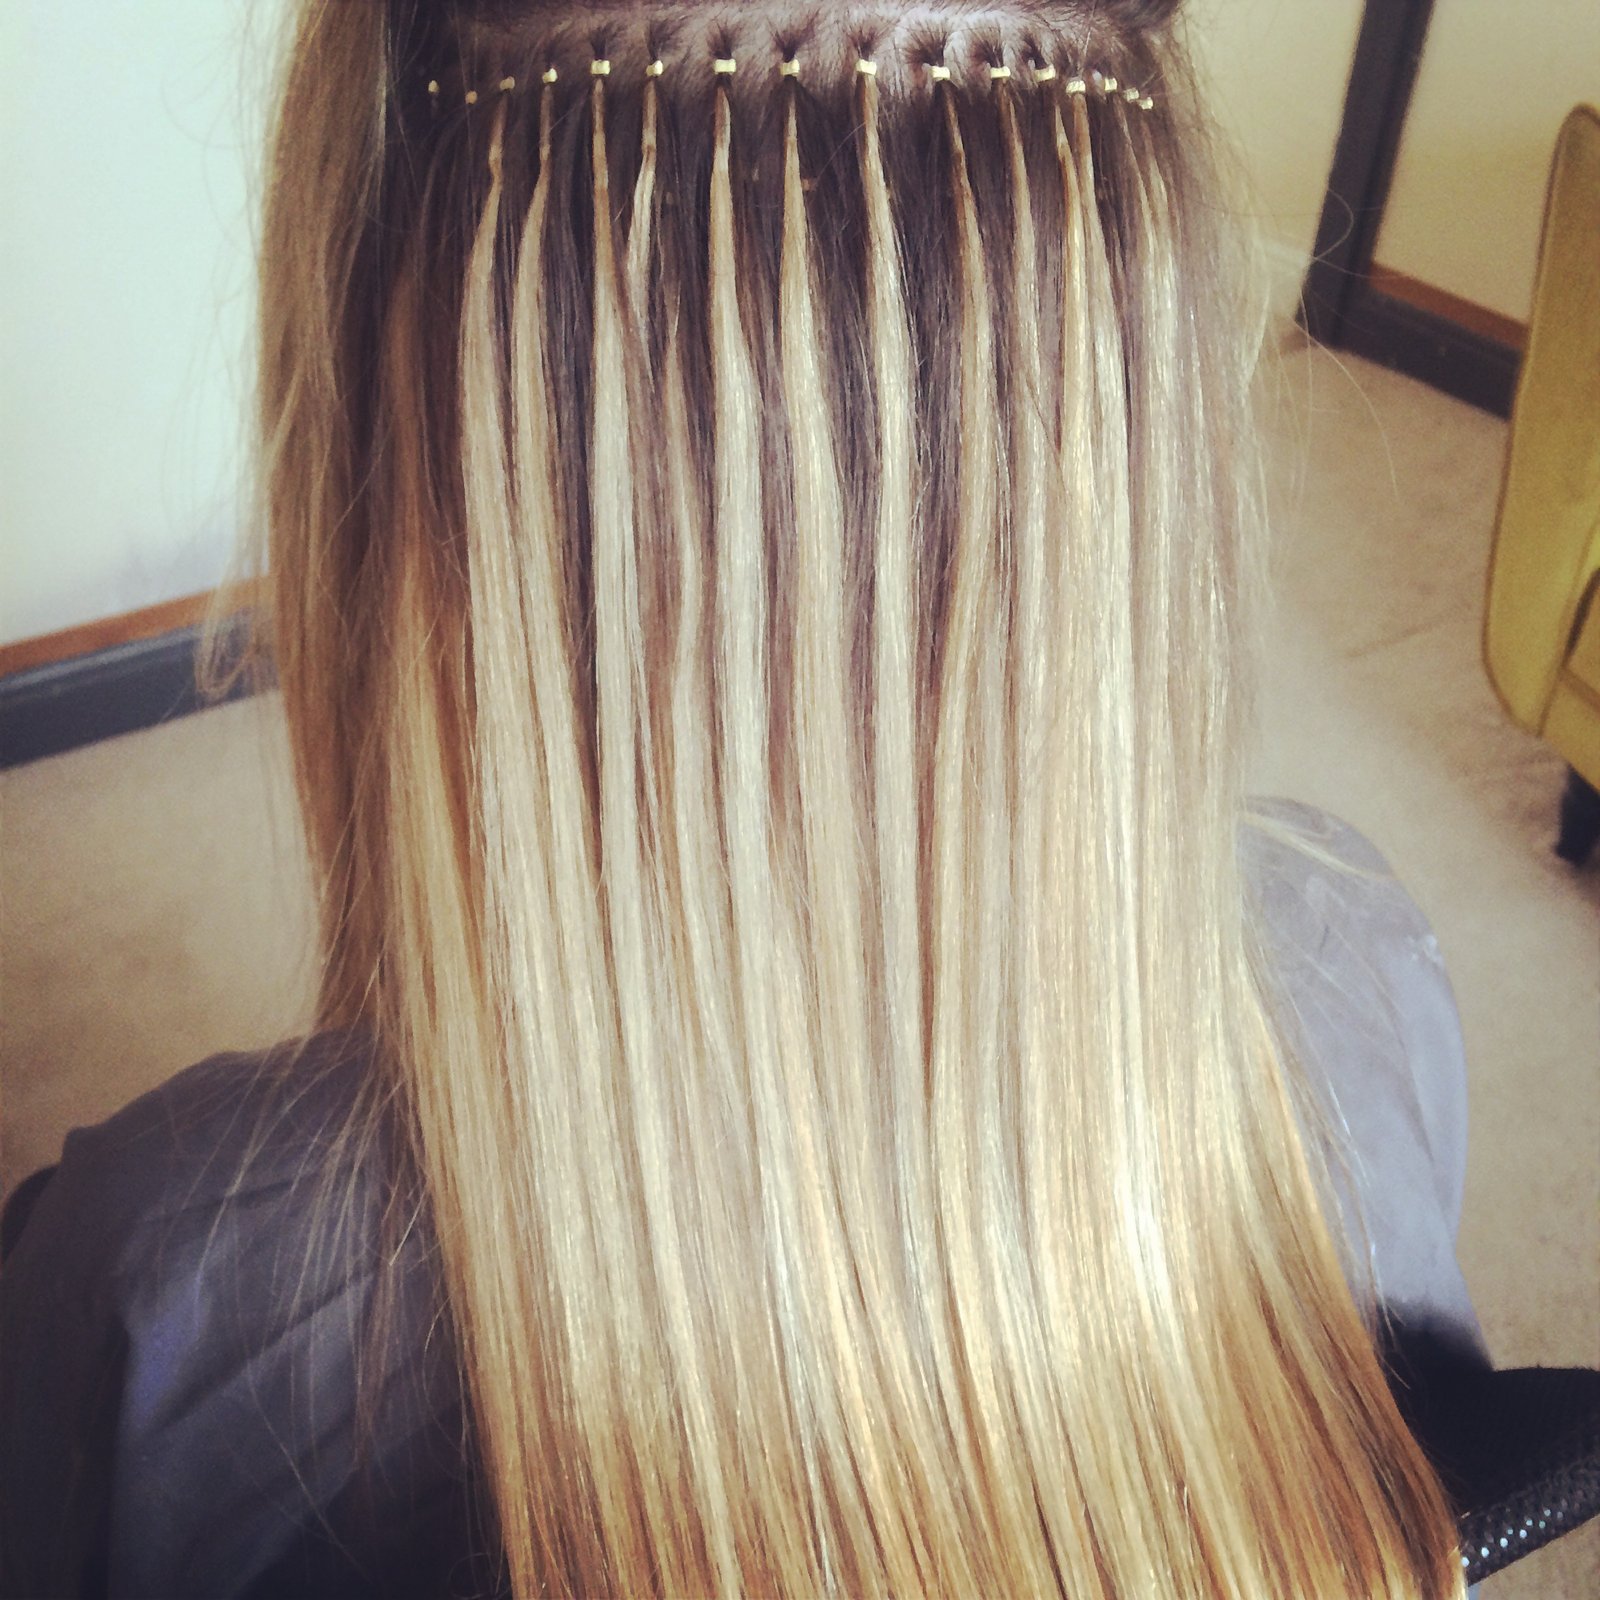 What's the difference between microlink, microring, and microbead hair  extensions? - Quora